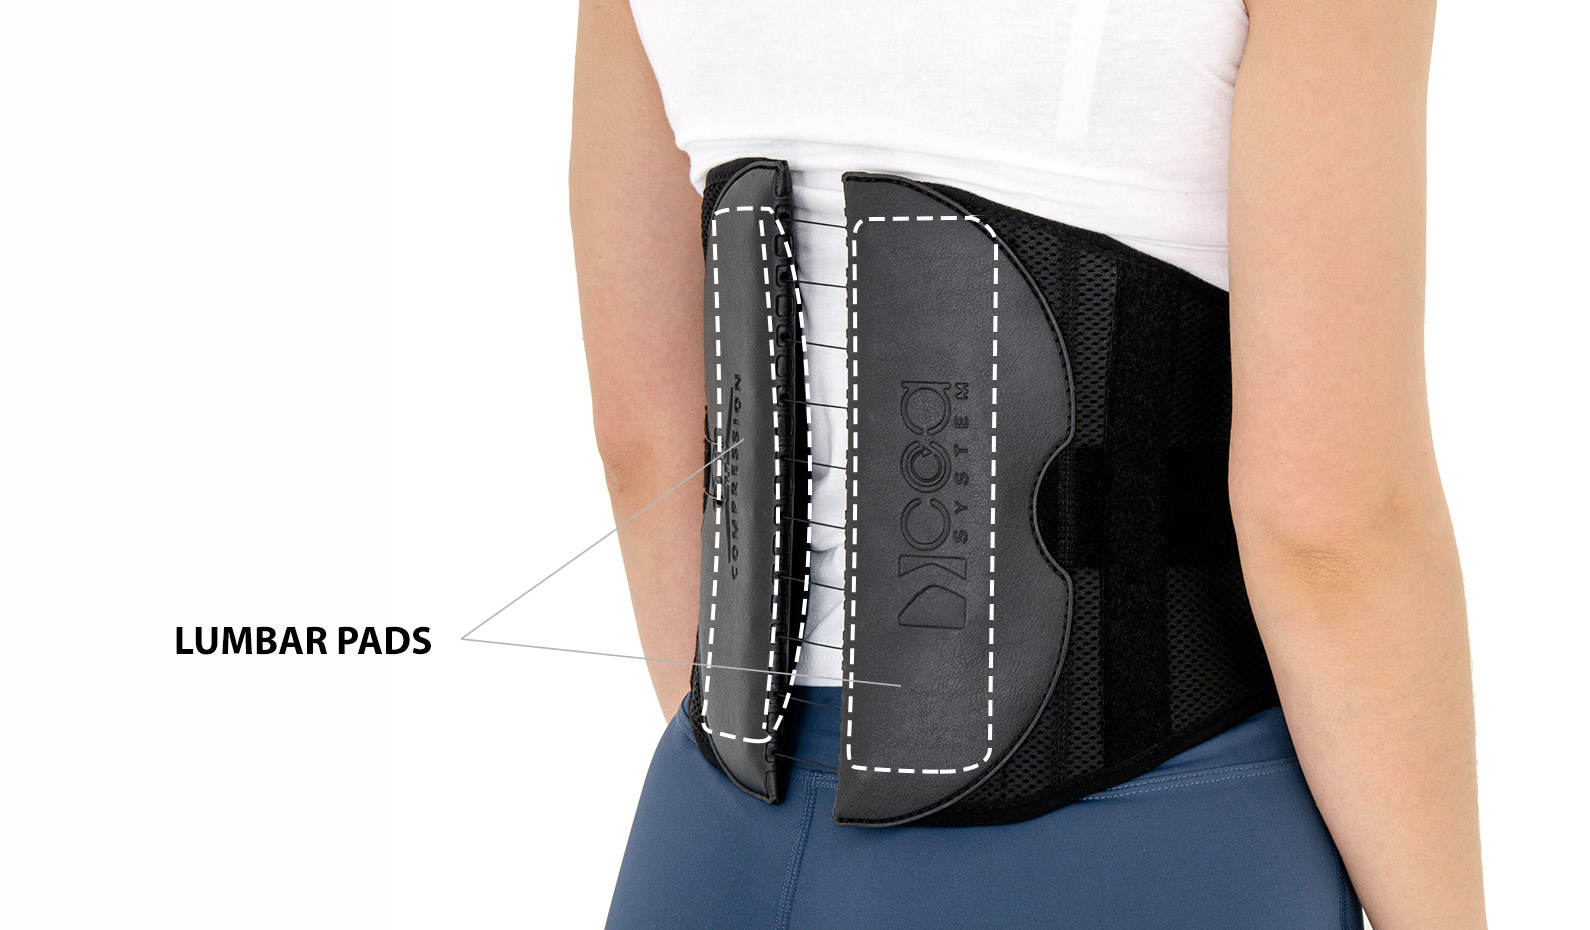 Back brace AR-WSP-03/CCA  Reh4Mat – lower limb orthosis and braces -  Manufacturer of modern orthopaedic devices